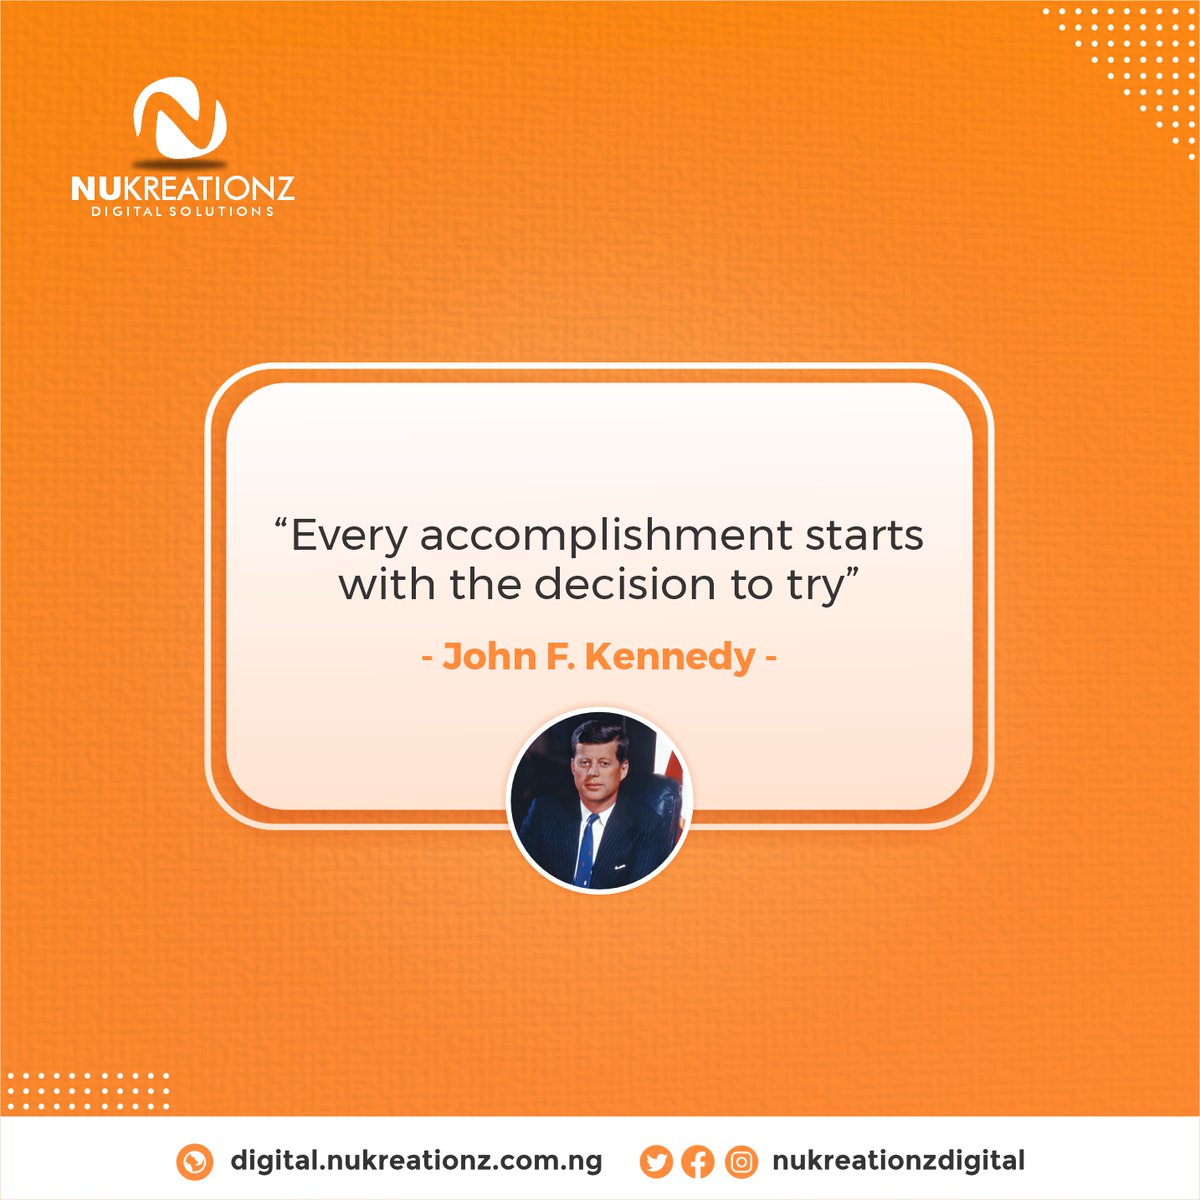 'Every accomplishment starts with the decision to try'
- John F. Kennedy

Follow @nukreationzdigital for more motivational quotes

#mondymotivation #motivation #monday #newweek #newweekfeeling #mondayvibes